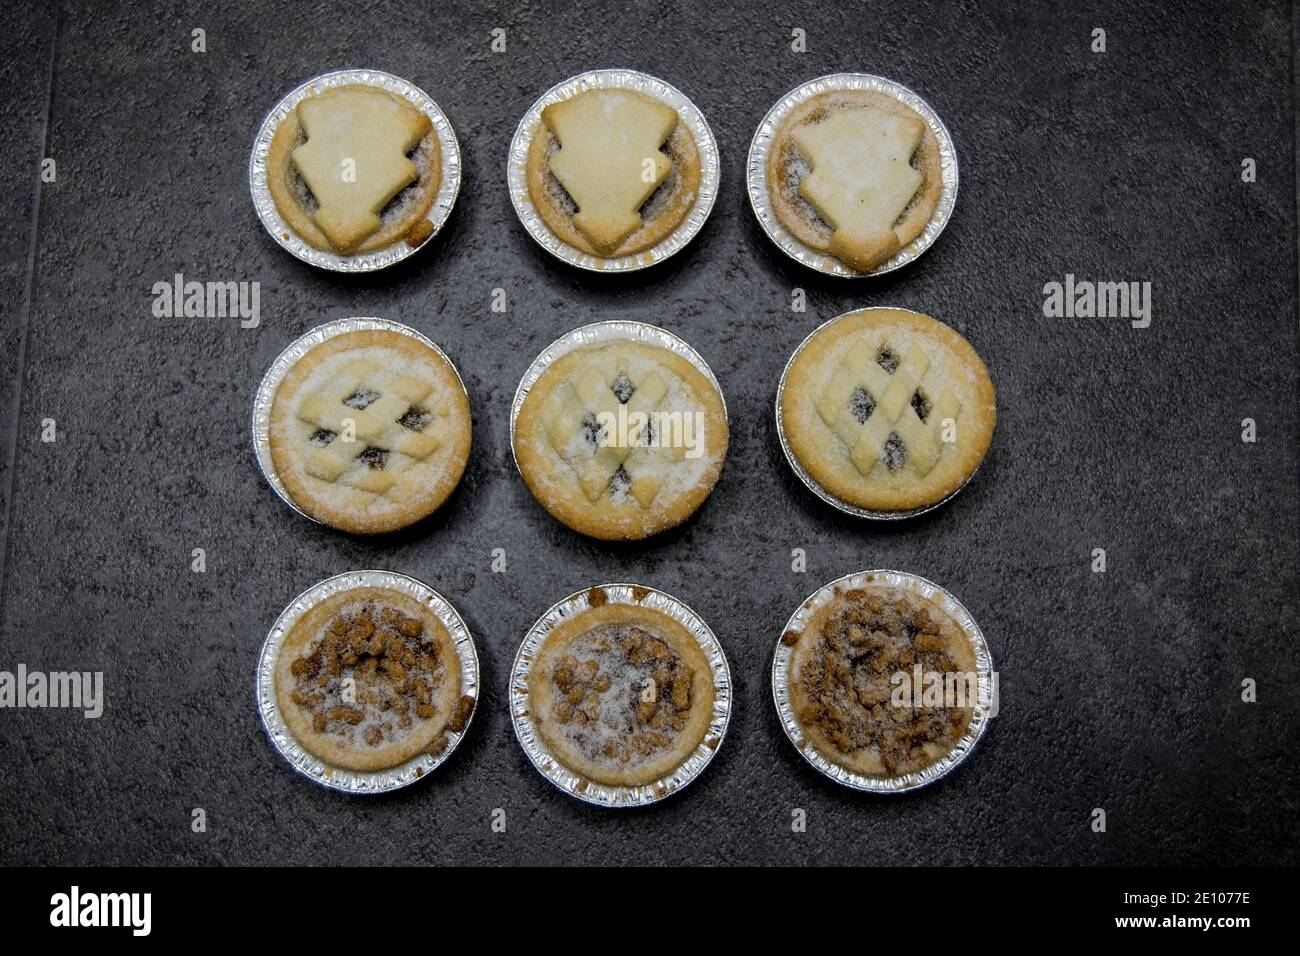 Nine Christmas mince pies on a dark background Stock Photo